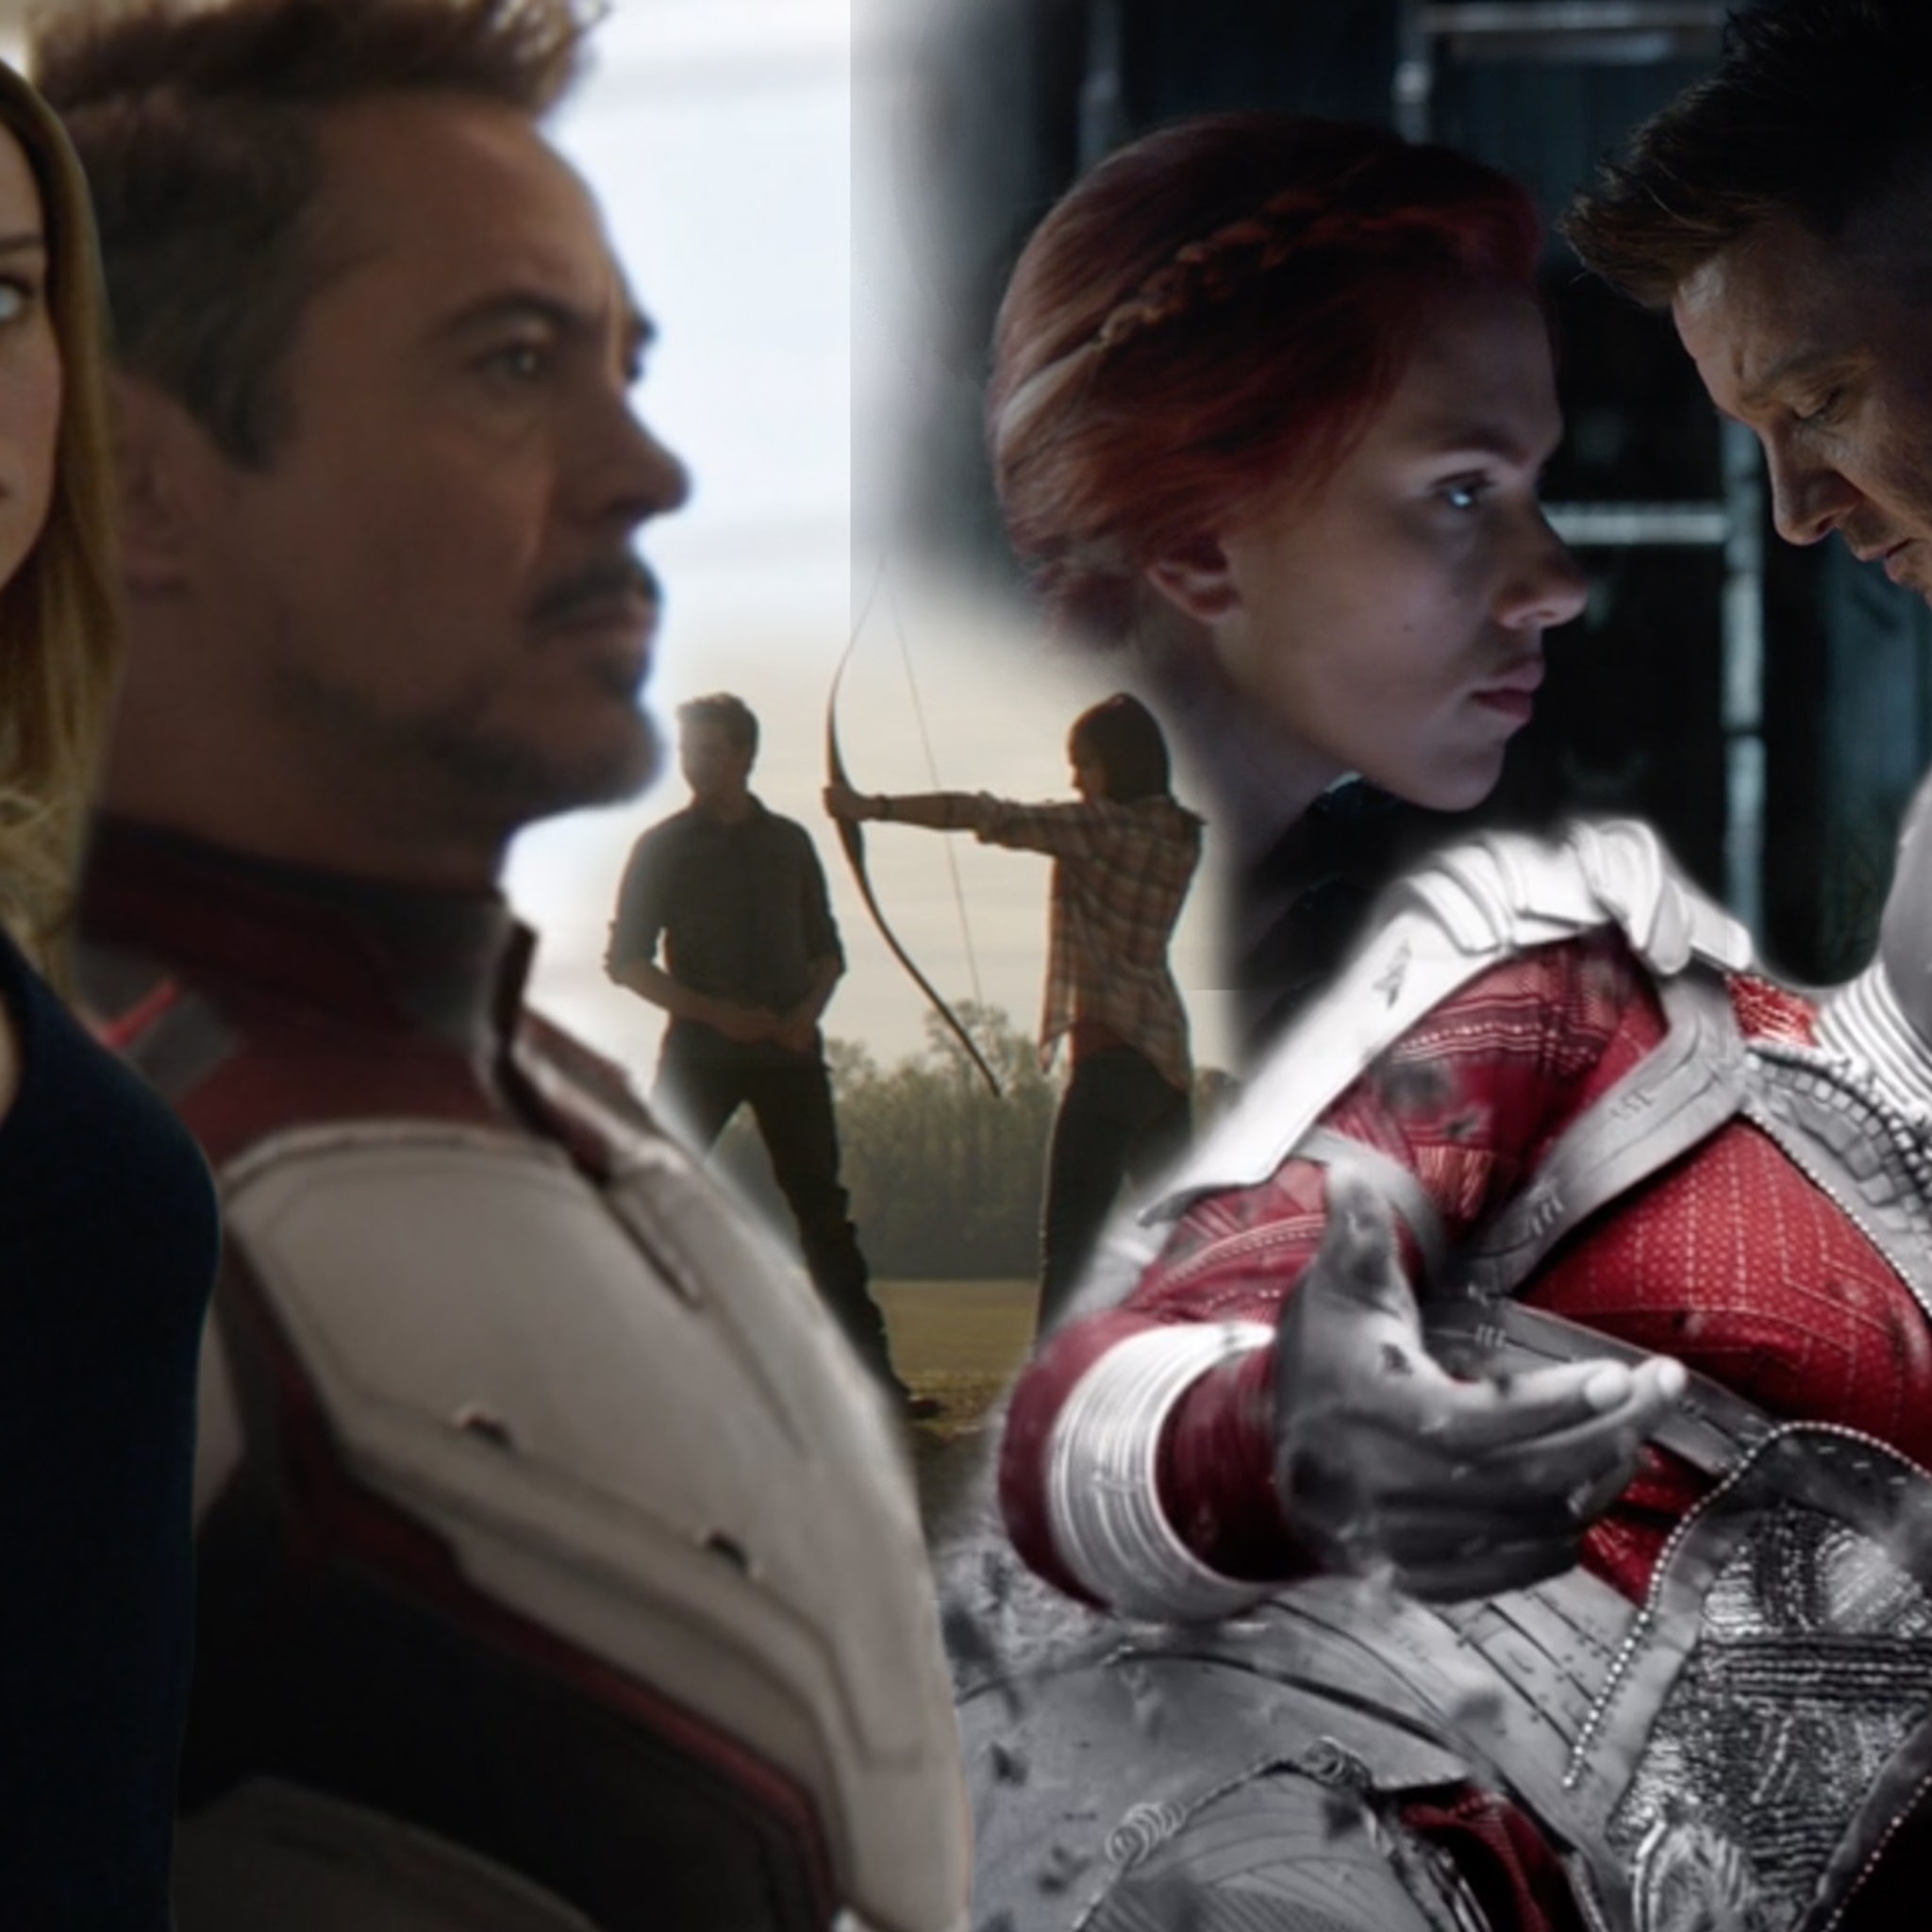 This One Endgame Scene Has Sparked A Massive Debate On Twitter